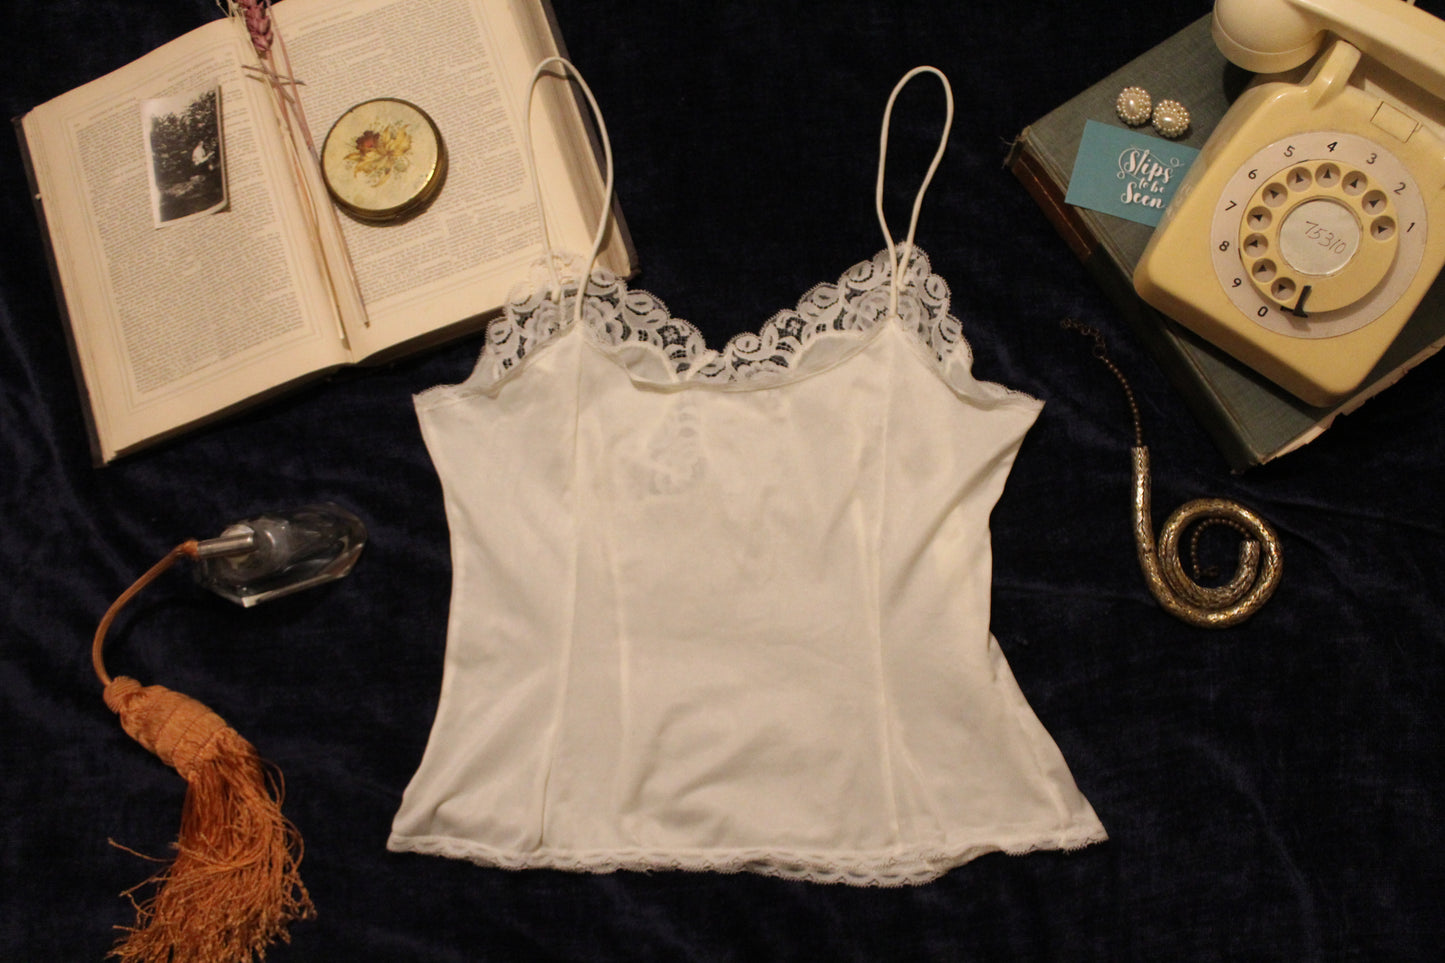 Ivory lace top